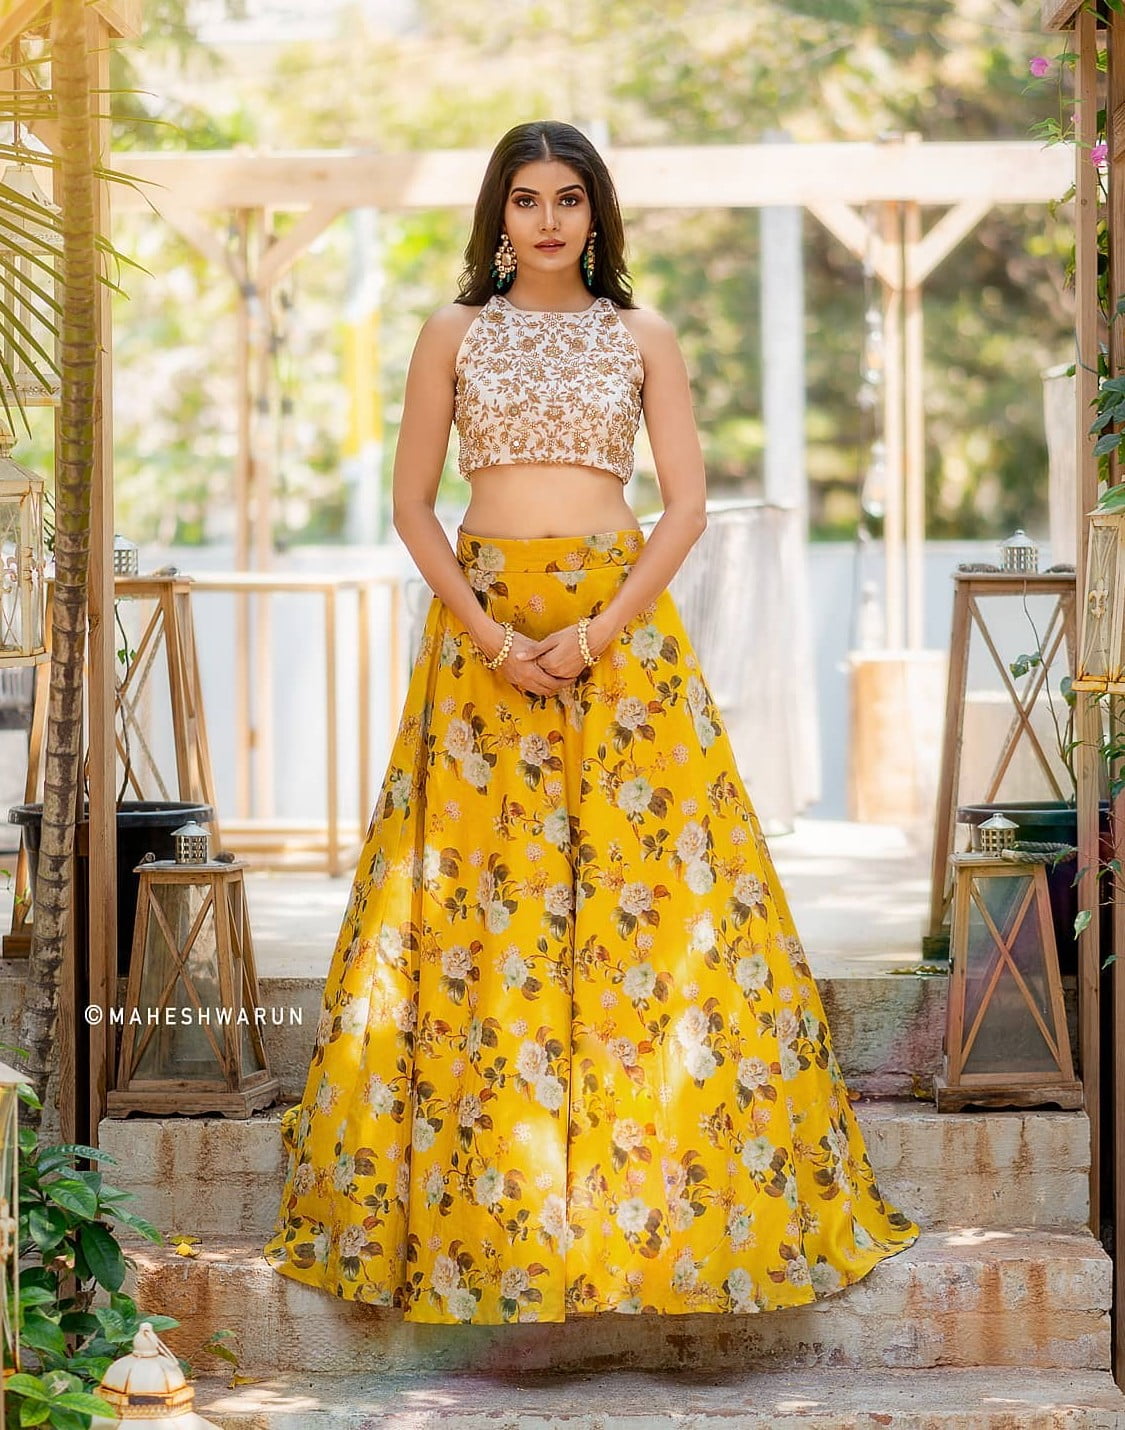 stylish white and yellow floral skirt top for haldi